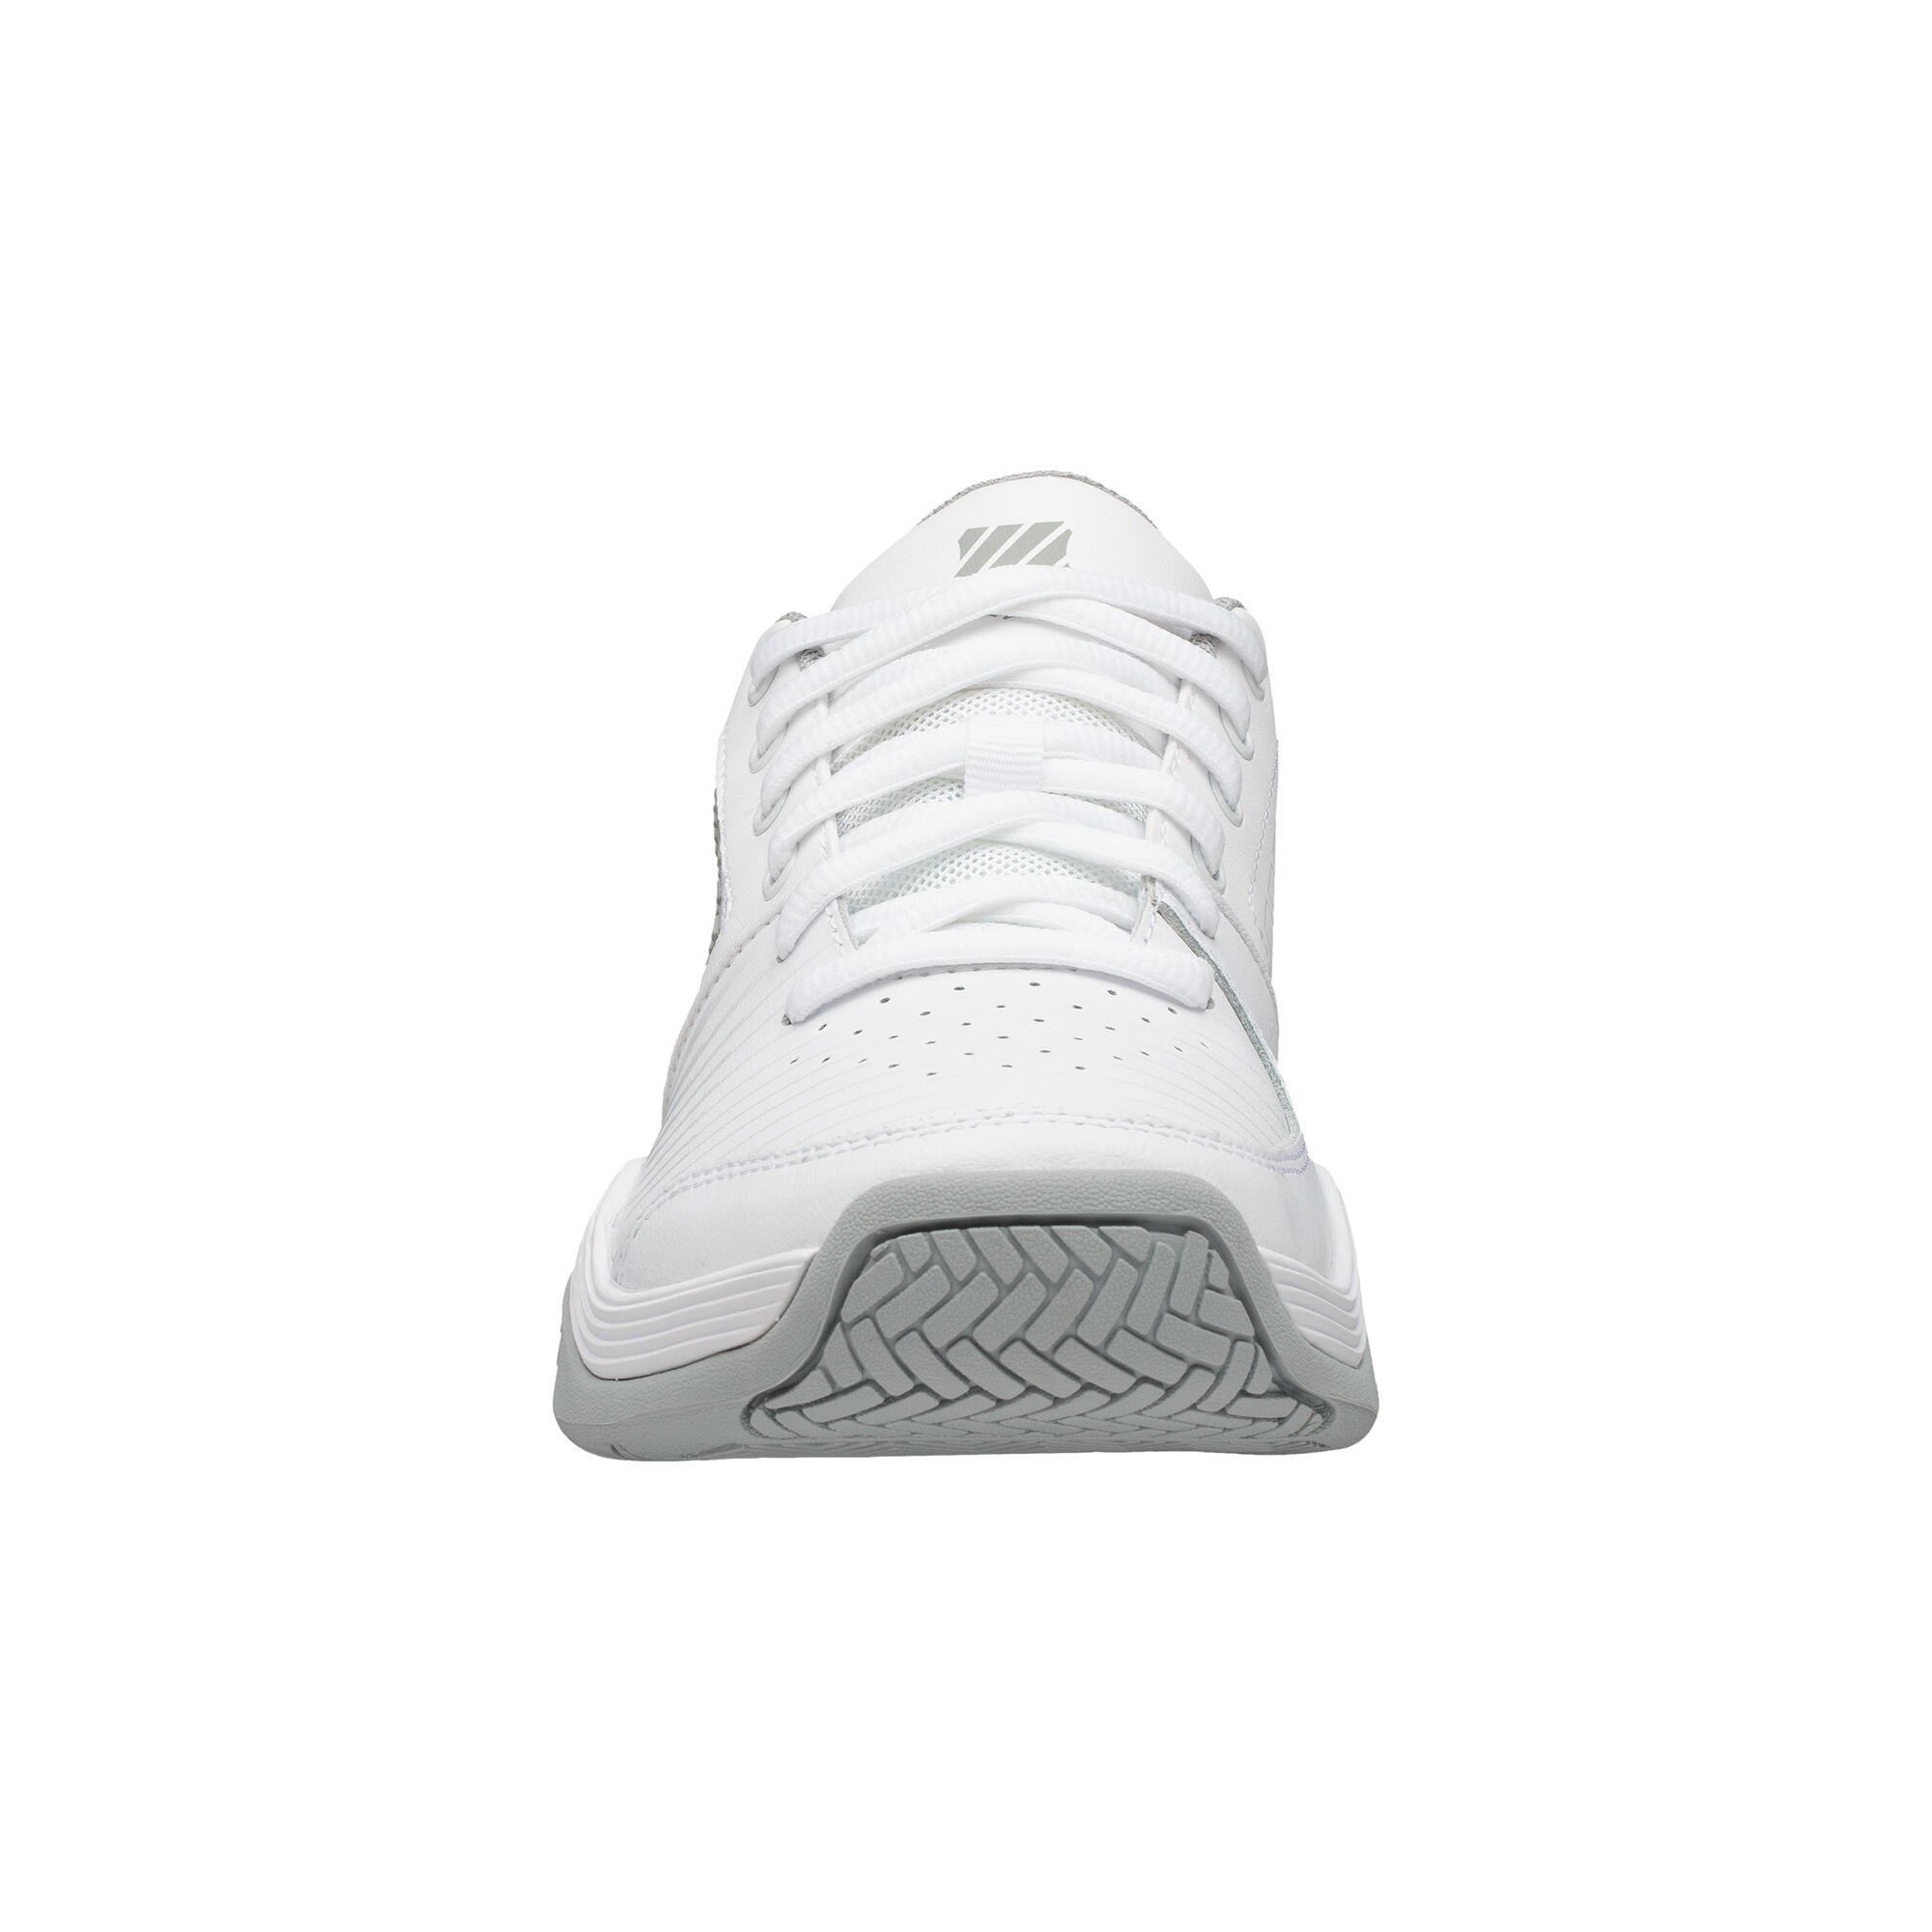 Women's Clay Court Tennis Shoes KSwiss Court Express - White 5/6